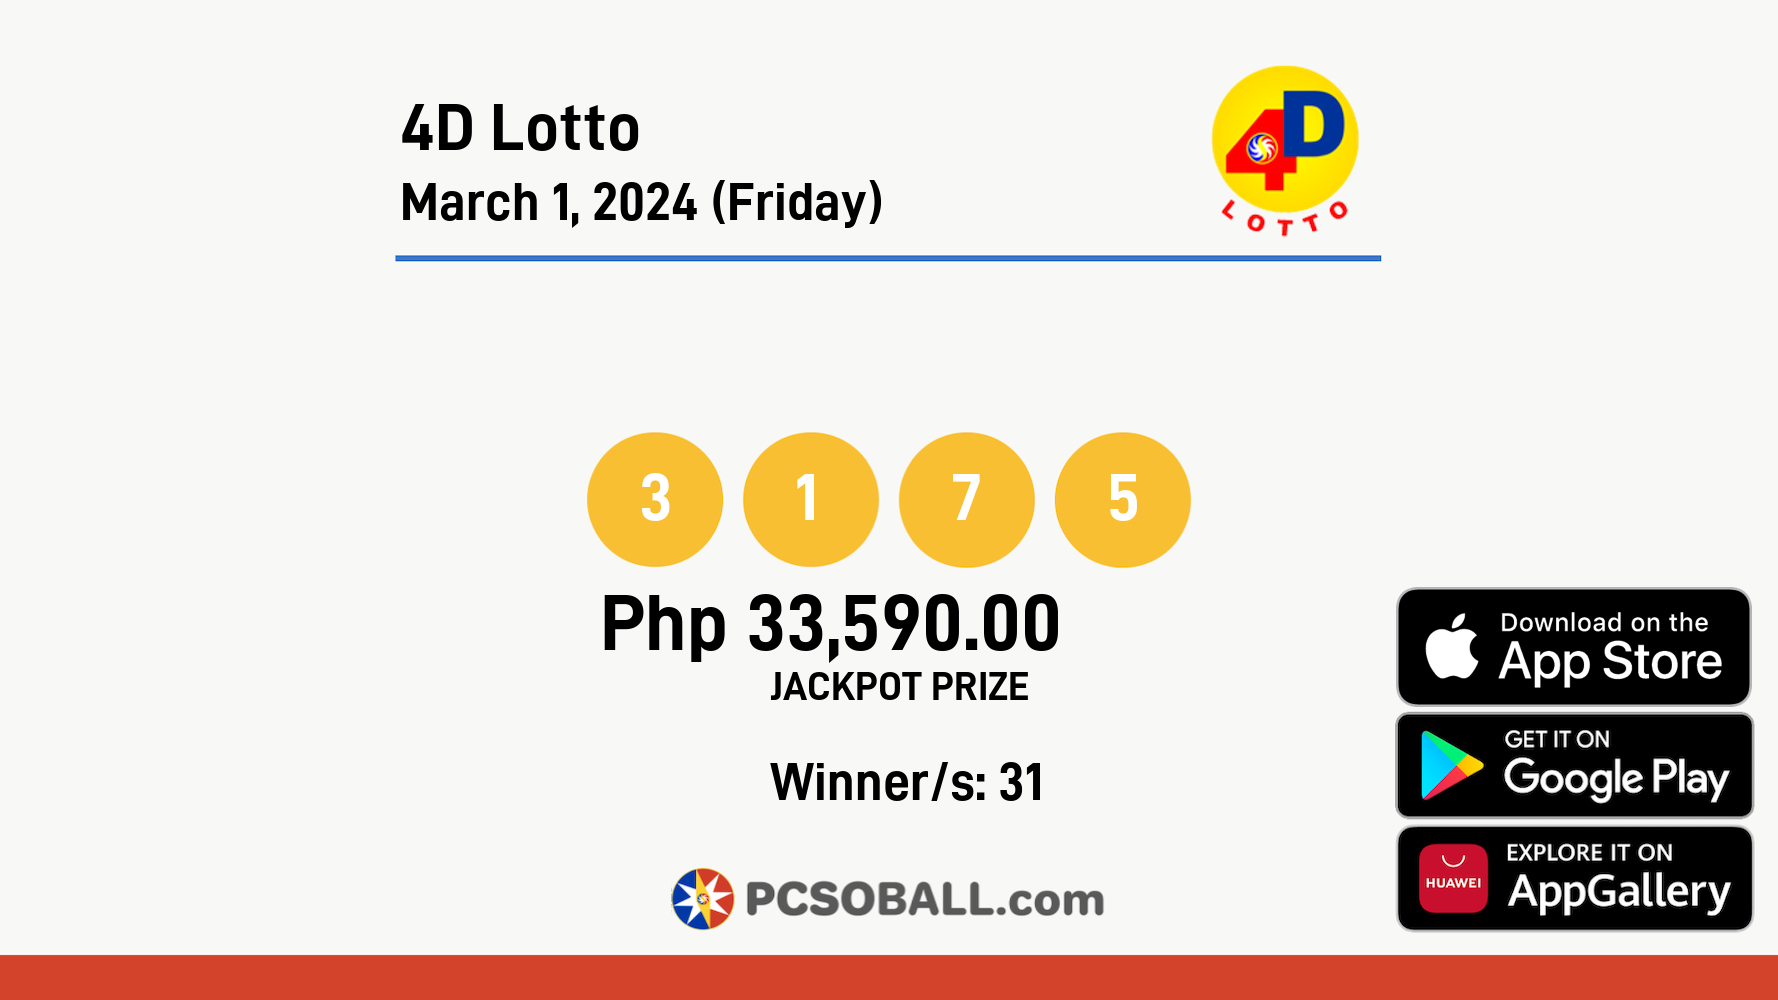 4D Lotto March 1, 2024 (Friday) Result